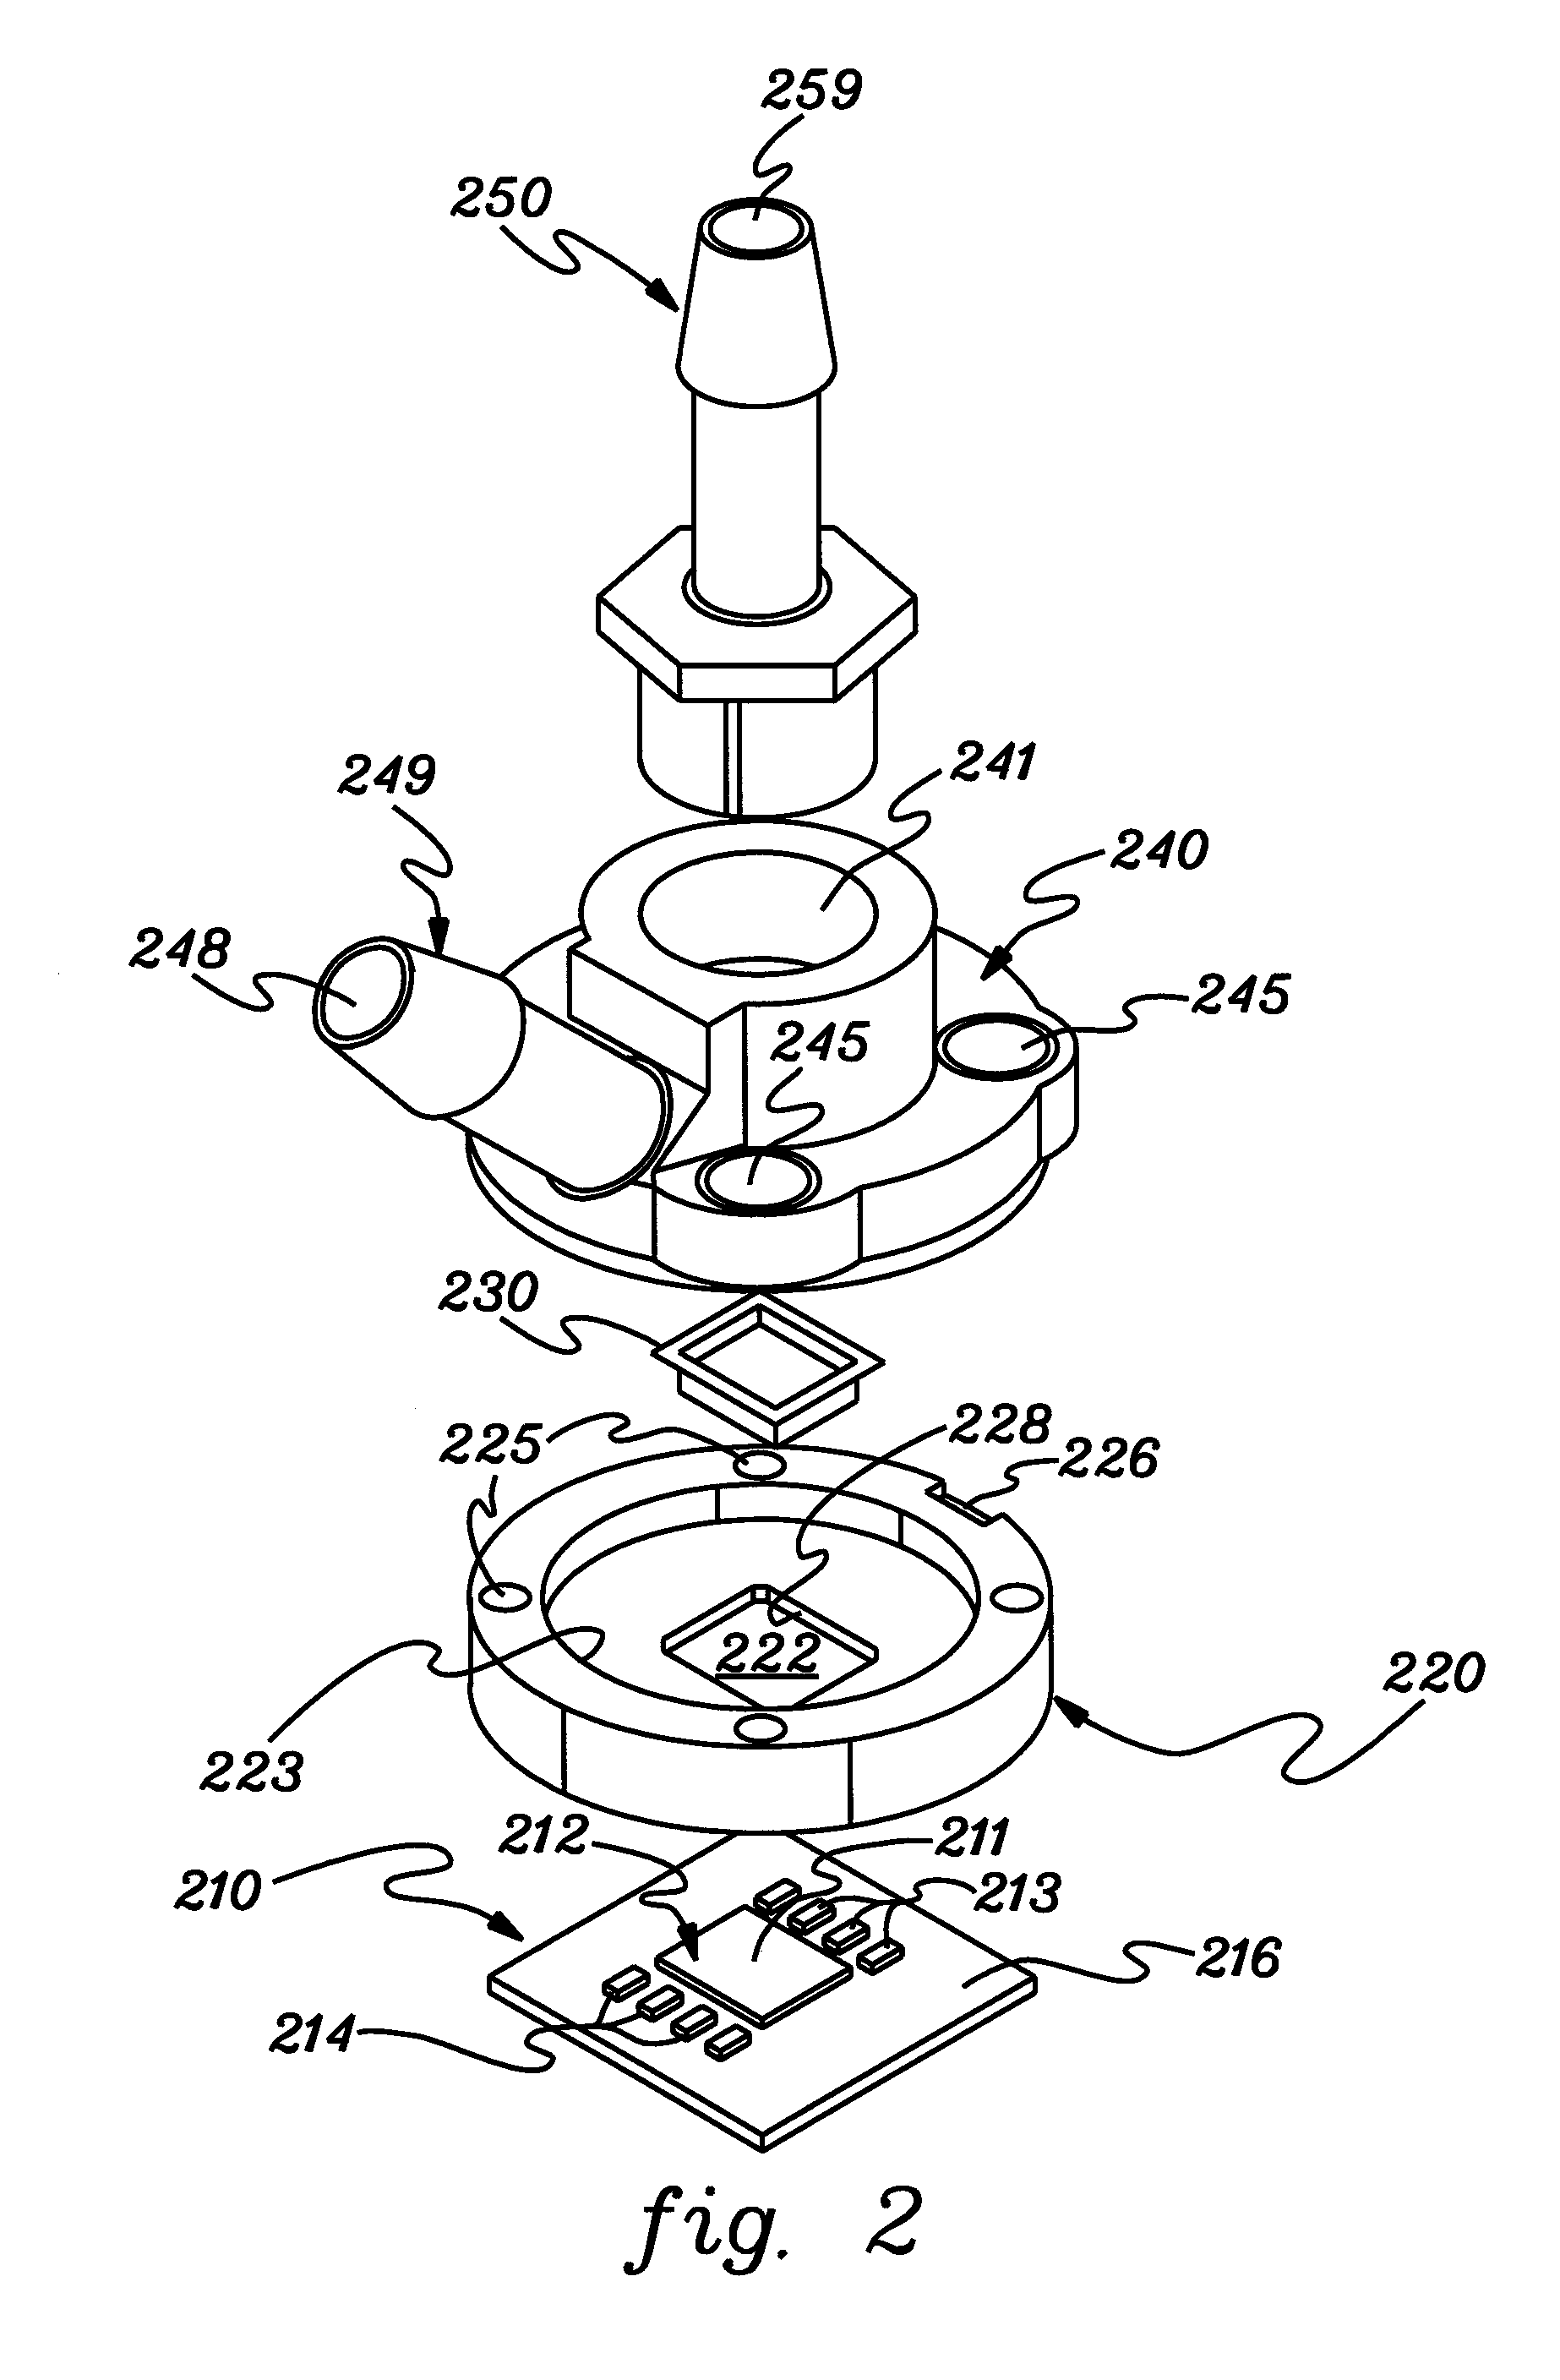 Jet orifice plate with projecting jet orifice structures for direct impingement cooling apparatus